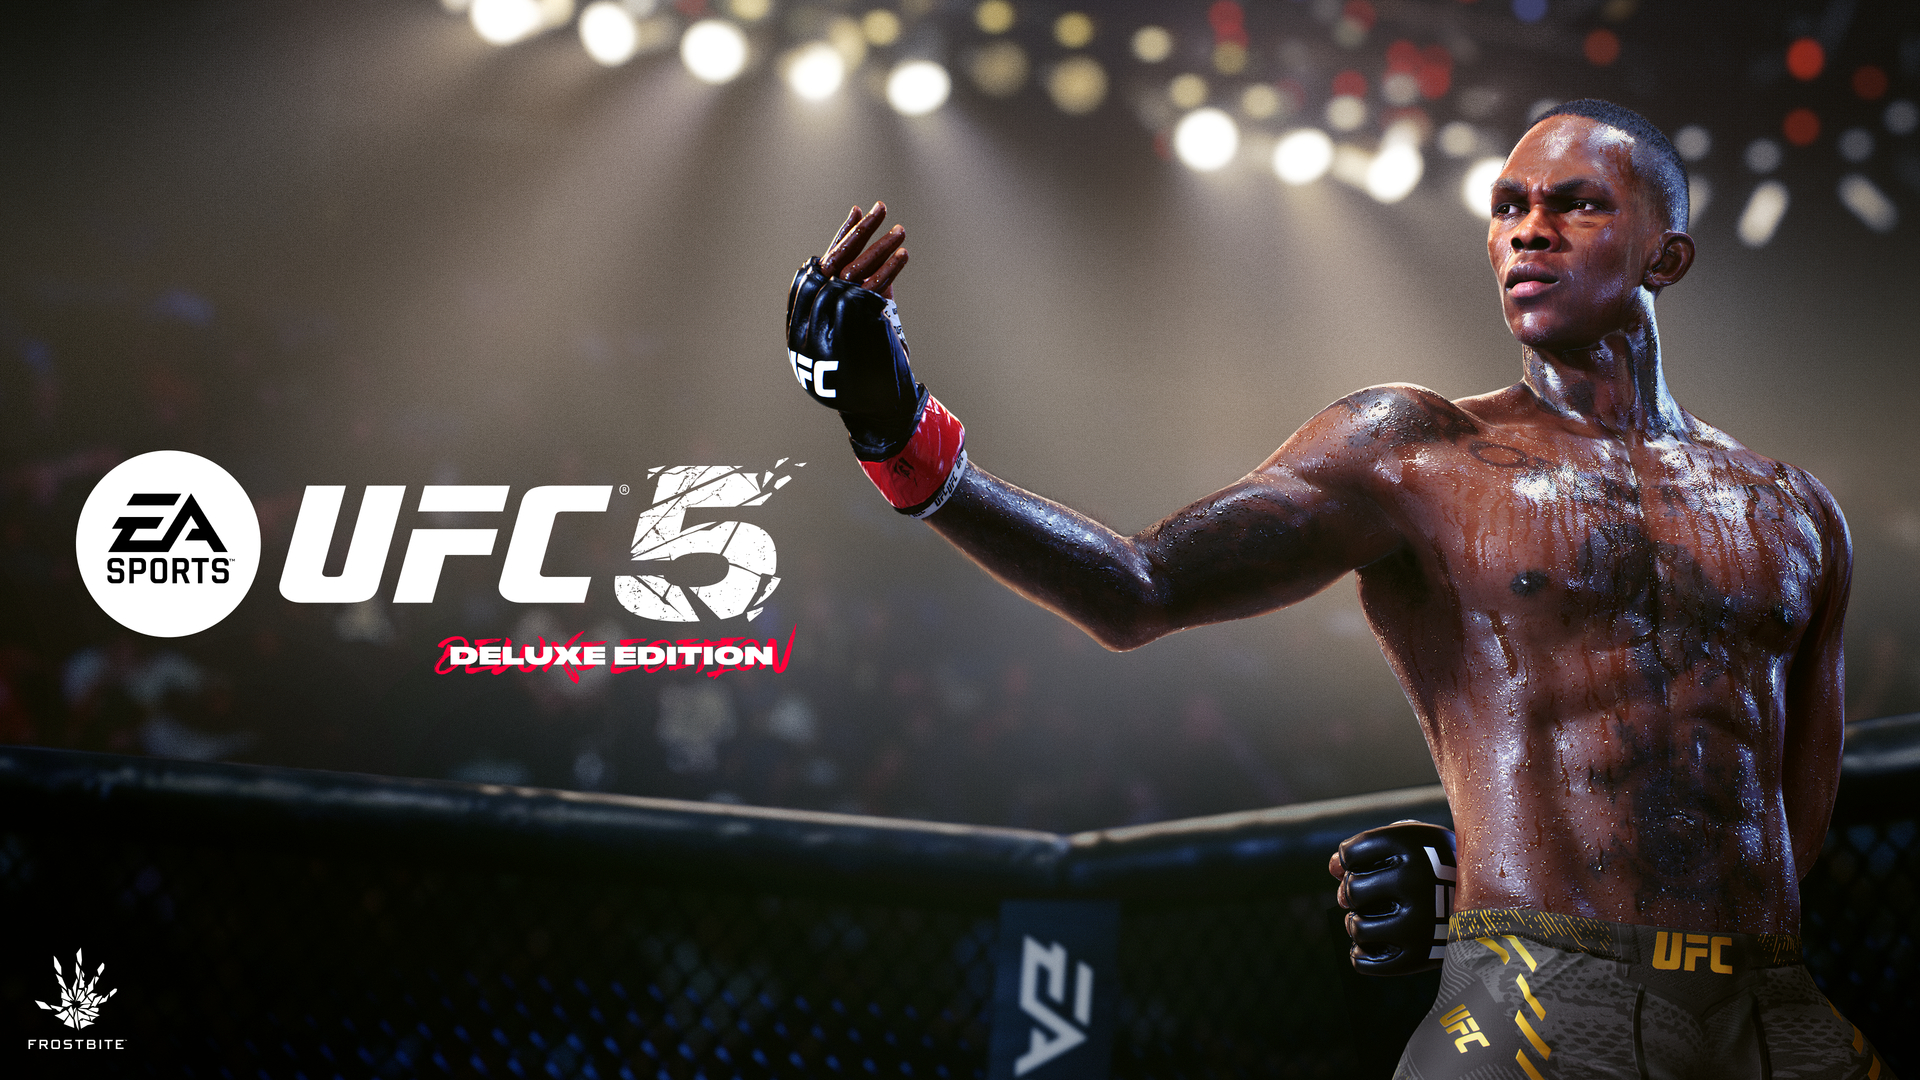 Electronic Arts SPORTS UFC 5 Arrives October 27: Feel the Fight With Visceral Gameplay and Graphics Powered